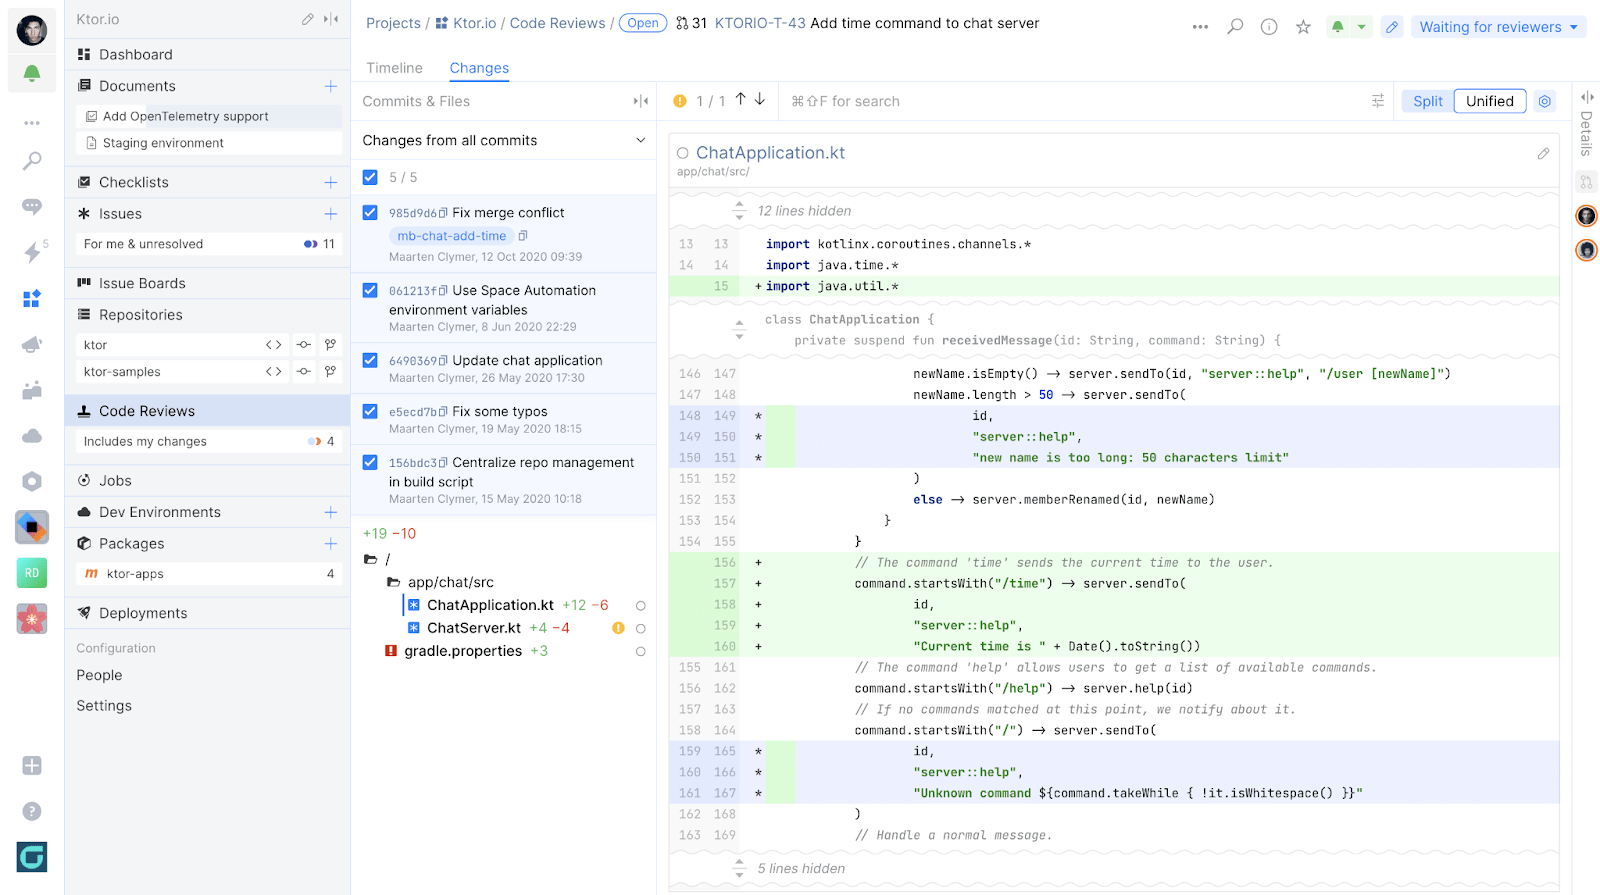 Introducing redesigned Code Reviews